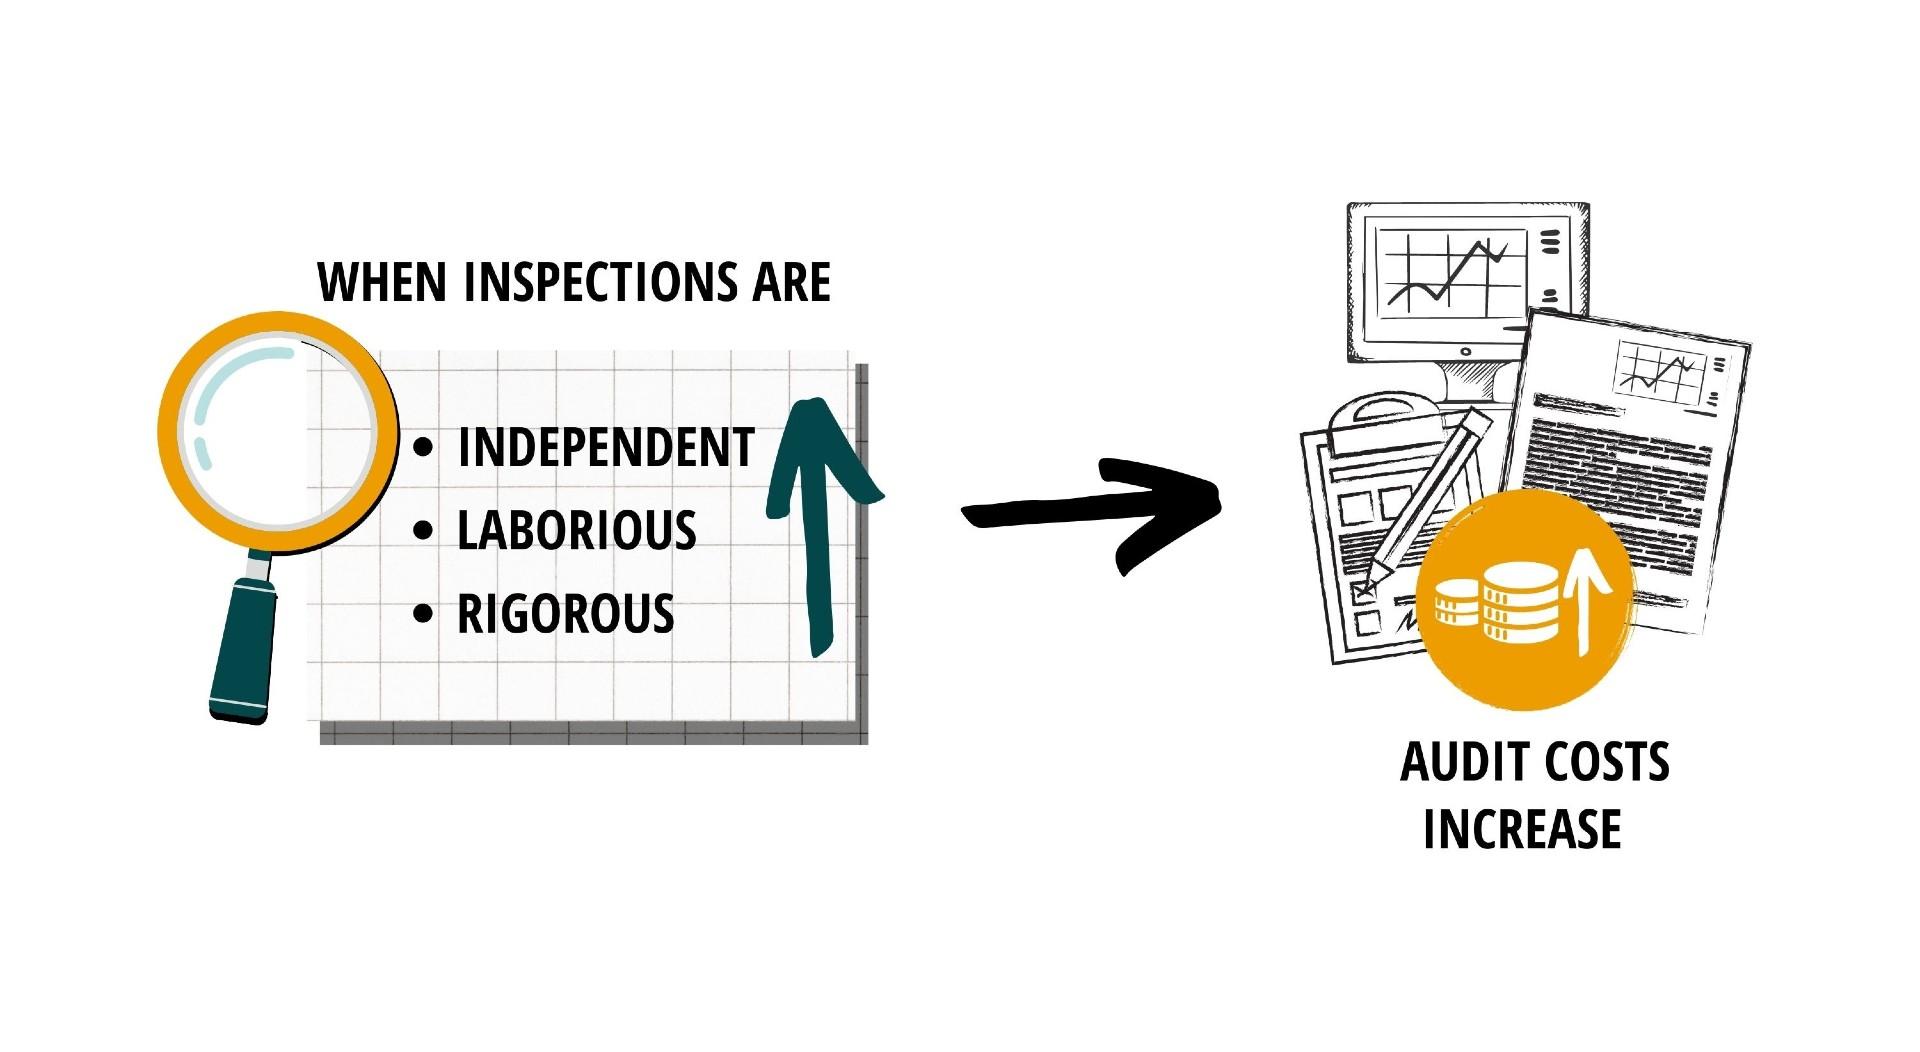 The illustration shows that audit costs increase for clients of inspected auditors when inspections are more laborious, independent, and rigorous.